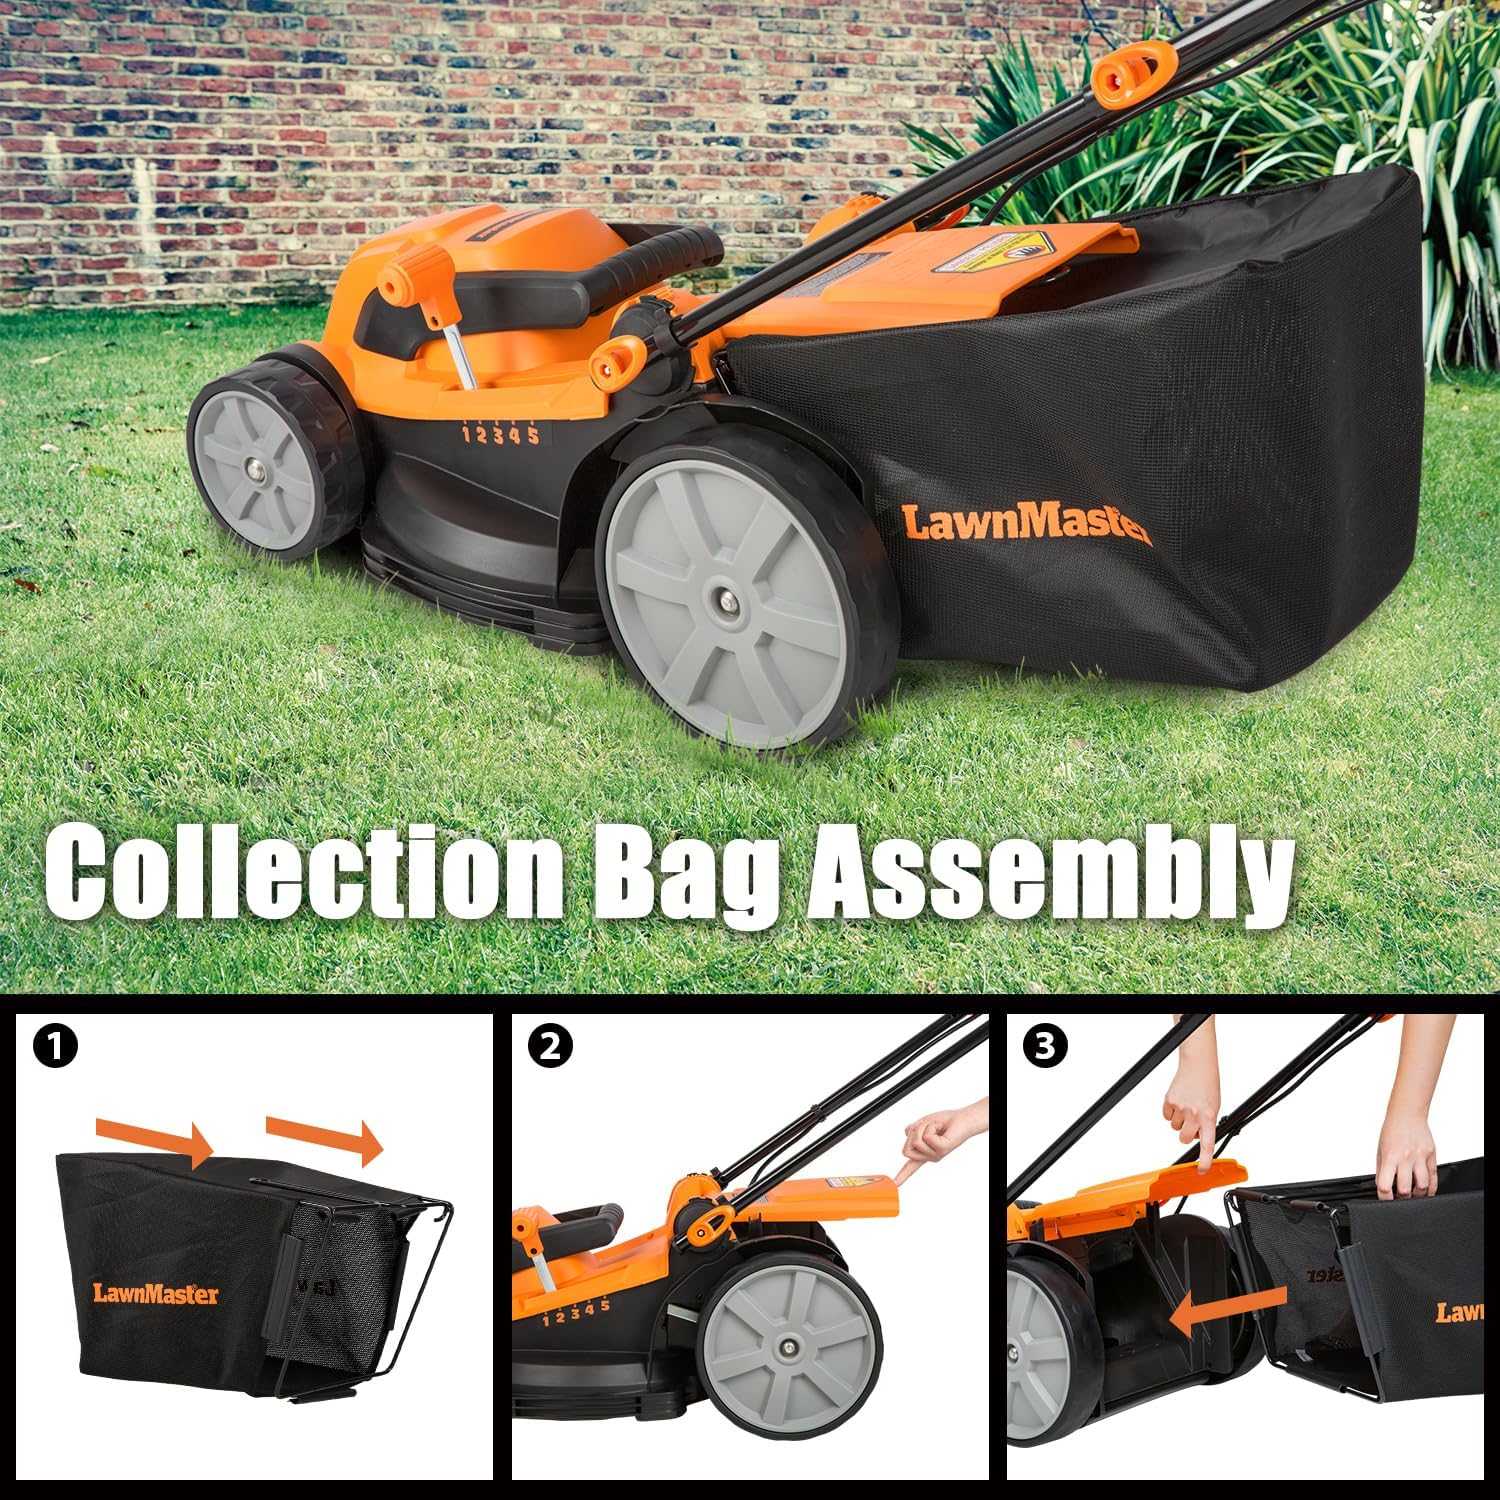 LawnMaster Electric Lawn Mower 16-Inch 12AMP